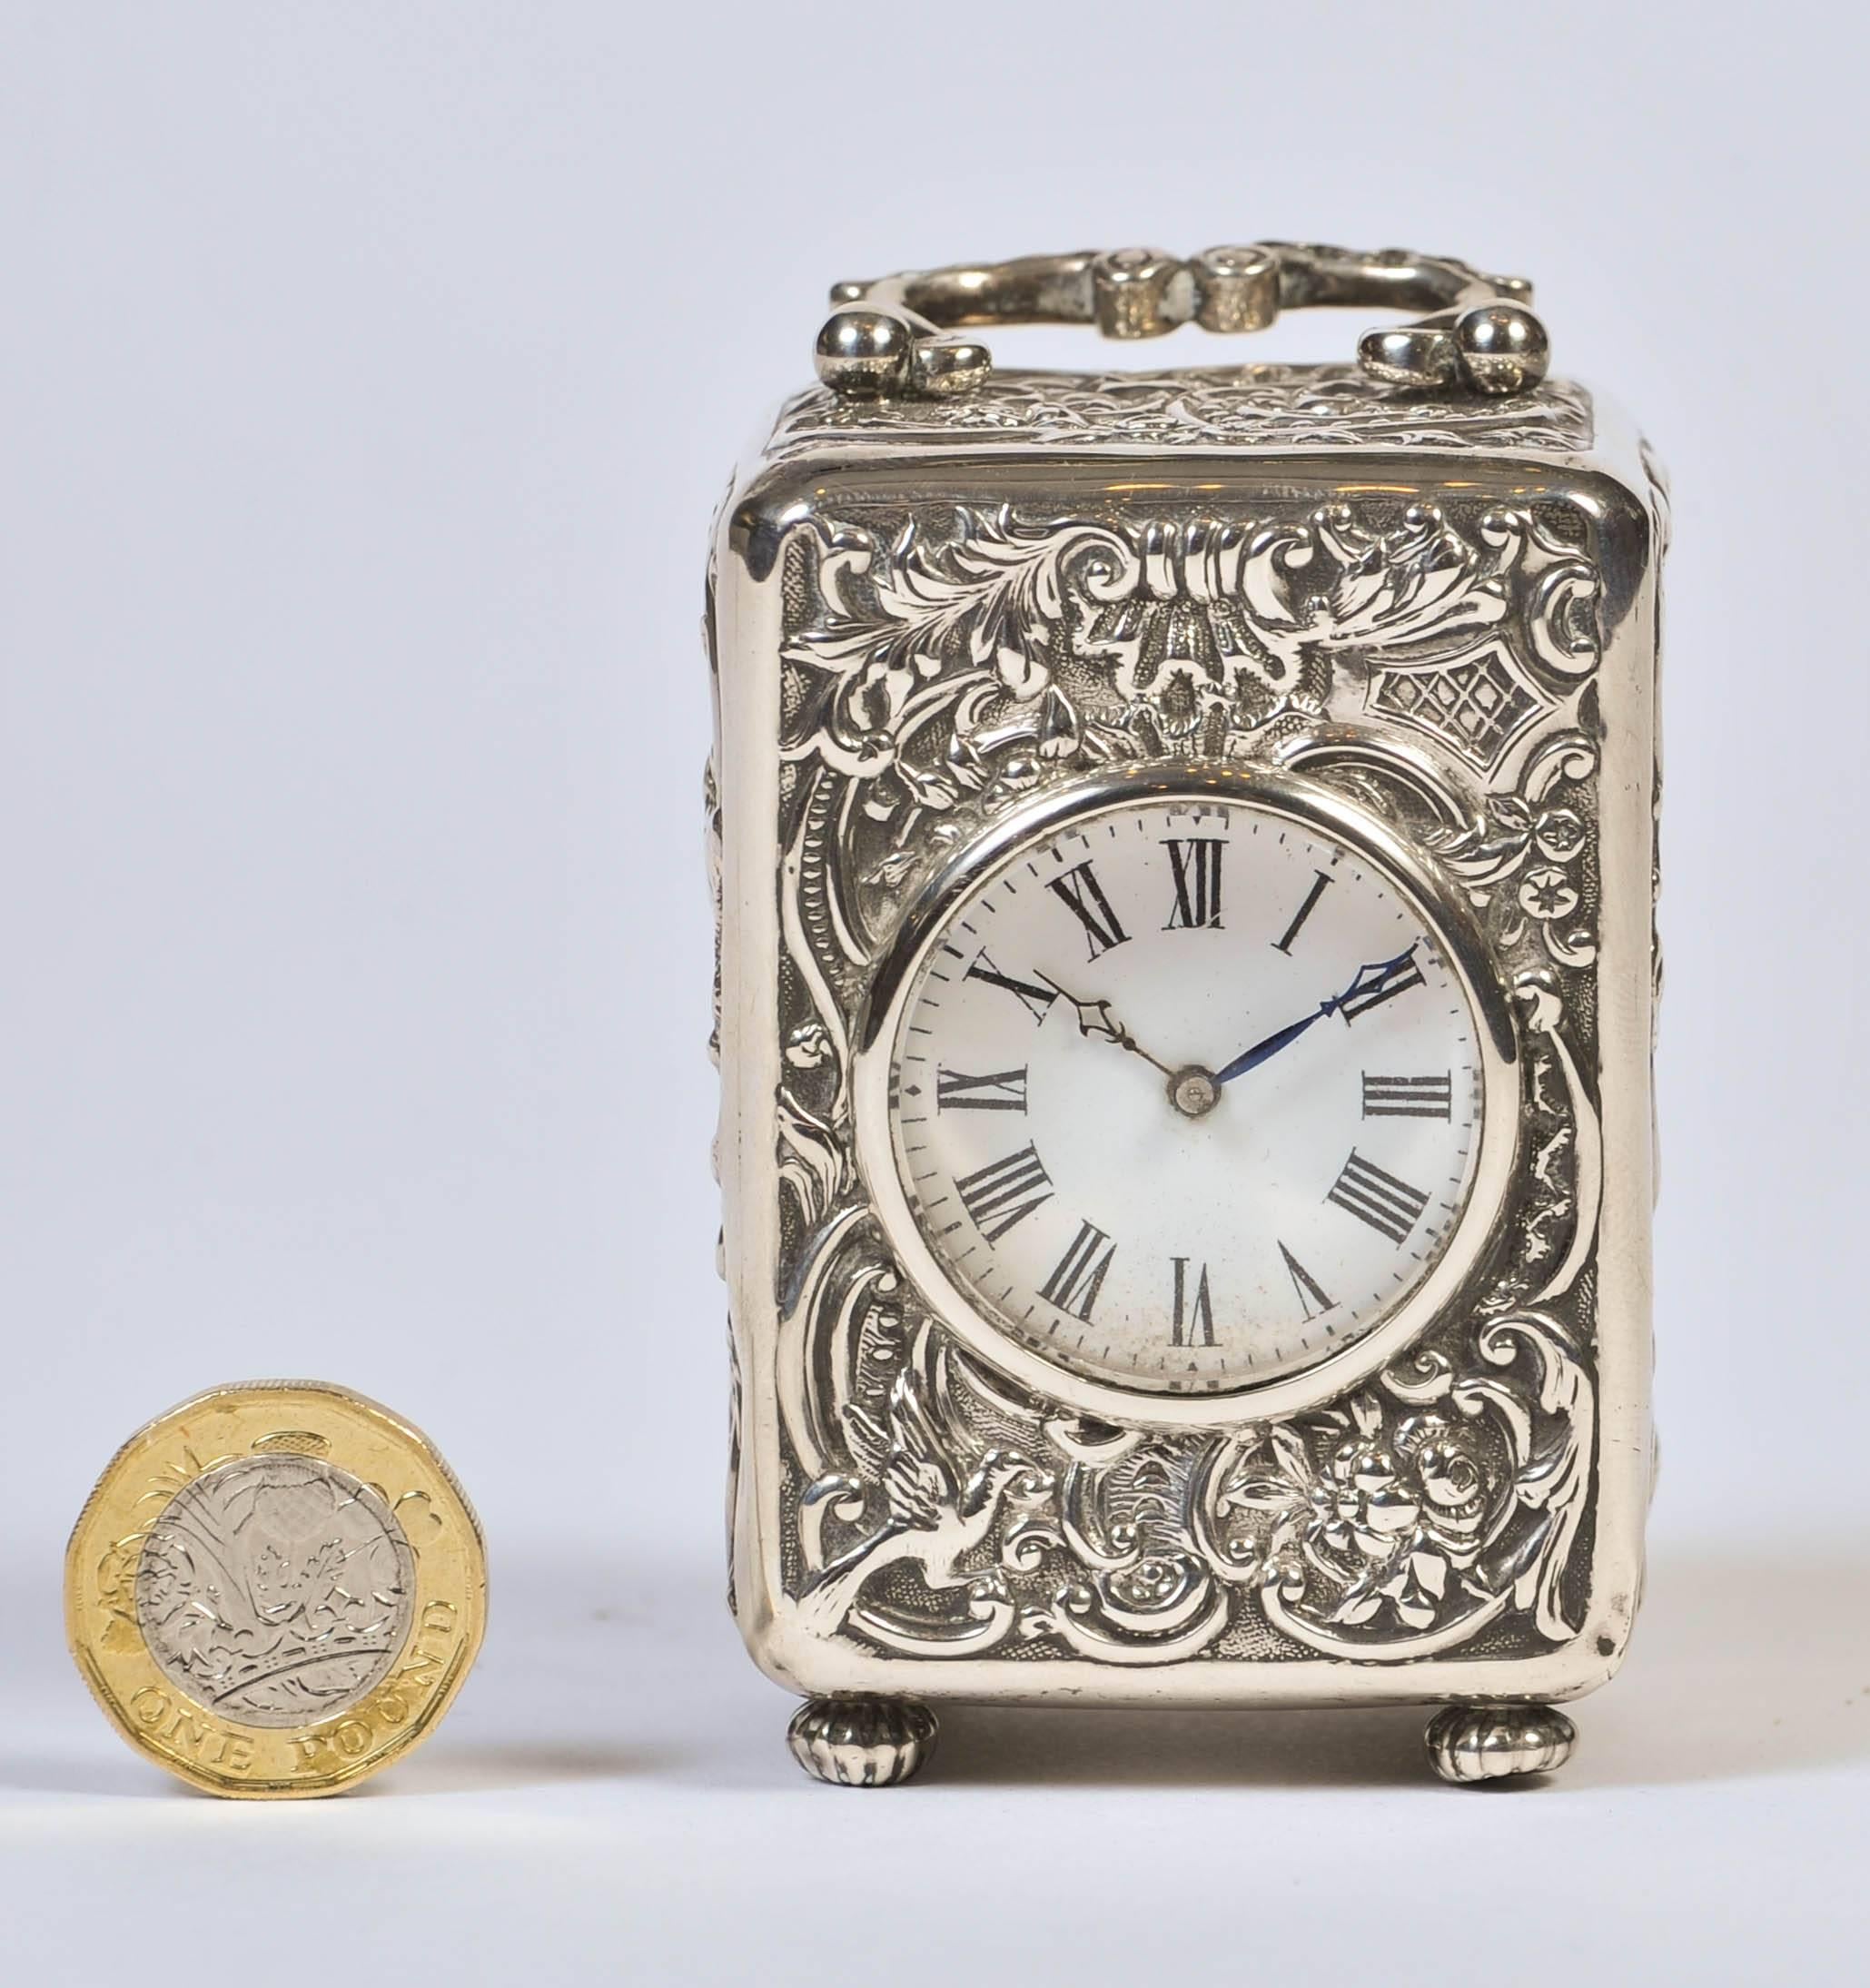 A charming diminutive carriage clock, the repoussé case with scroll, foliate and bird motifs, hallmarked William Comyns of London, 1896.
  